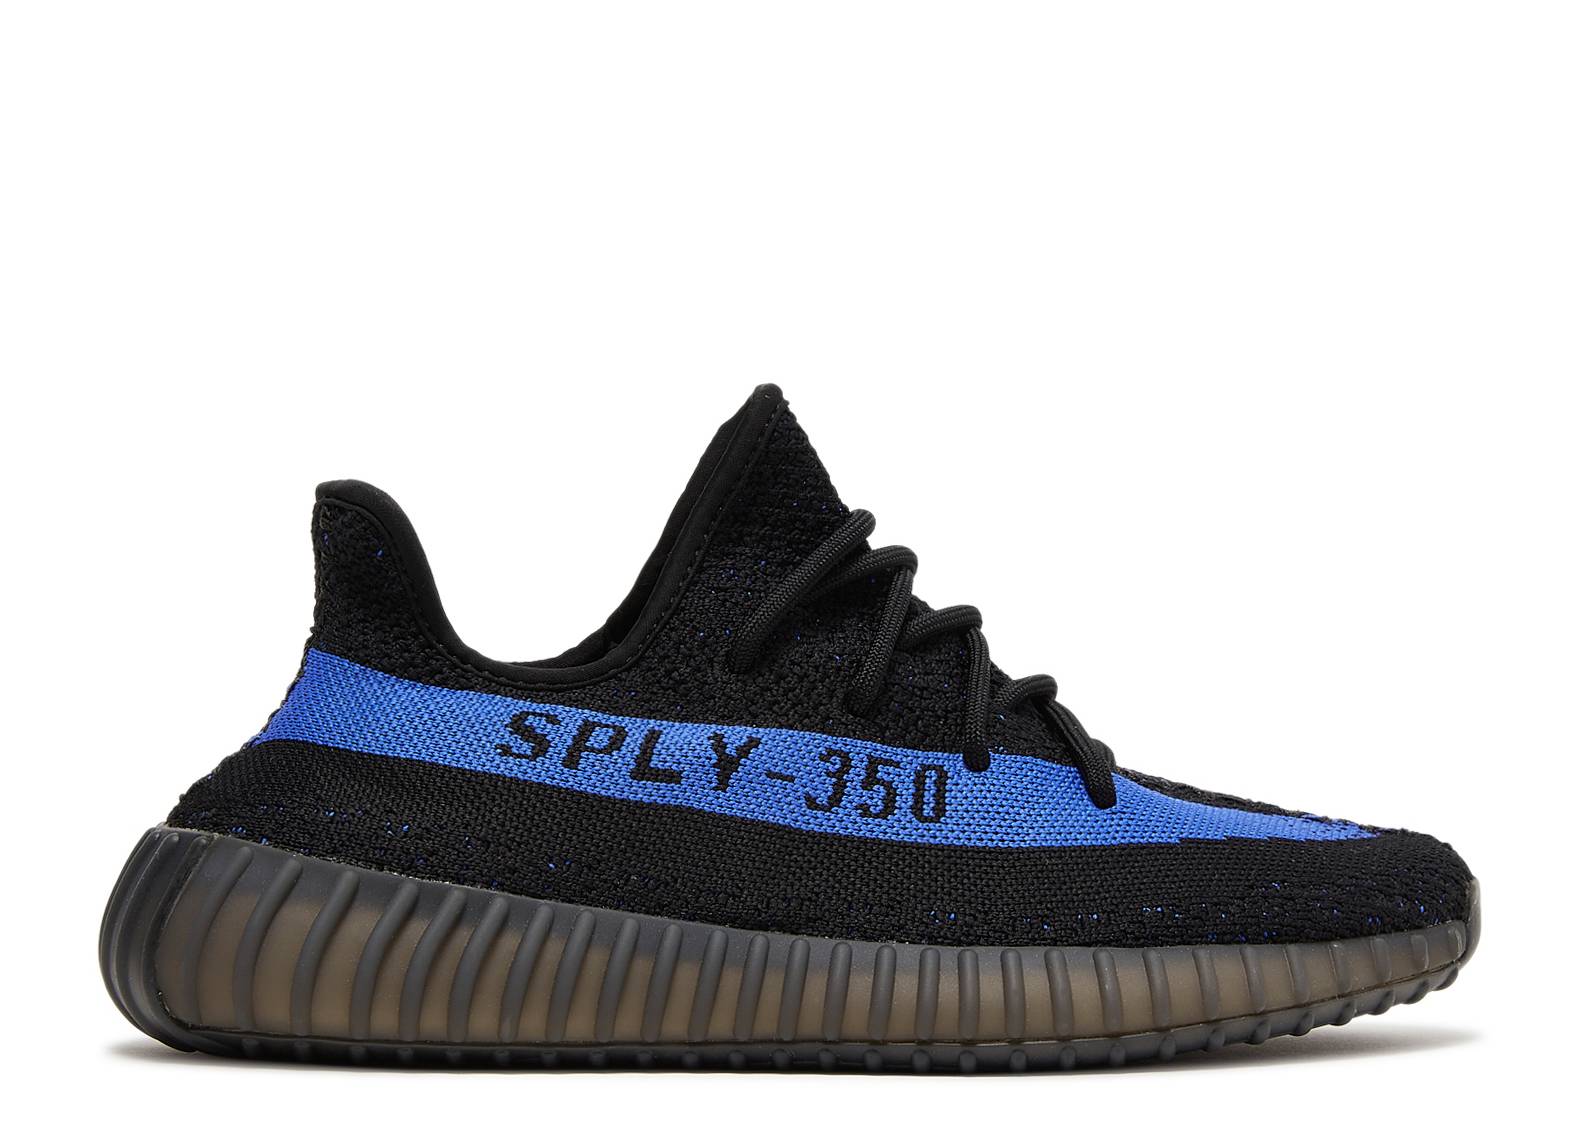 Yeezy Restock, Supreme x Nike, & Blue The Great Gets Fearless